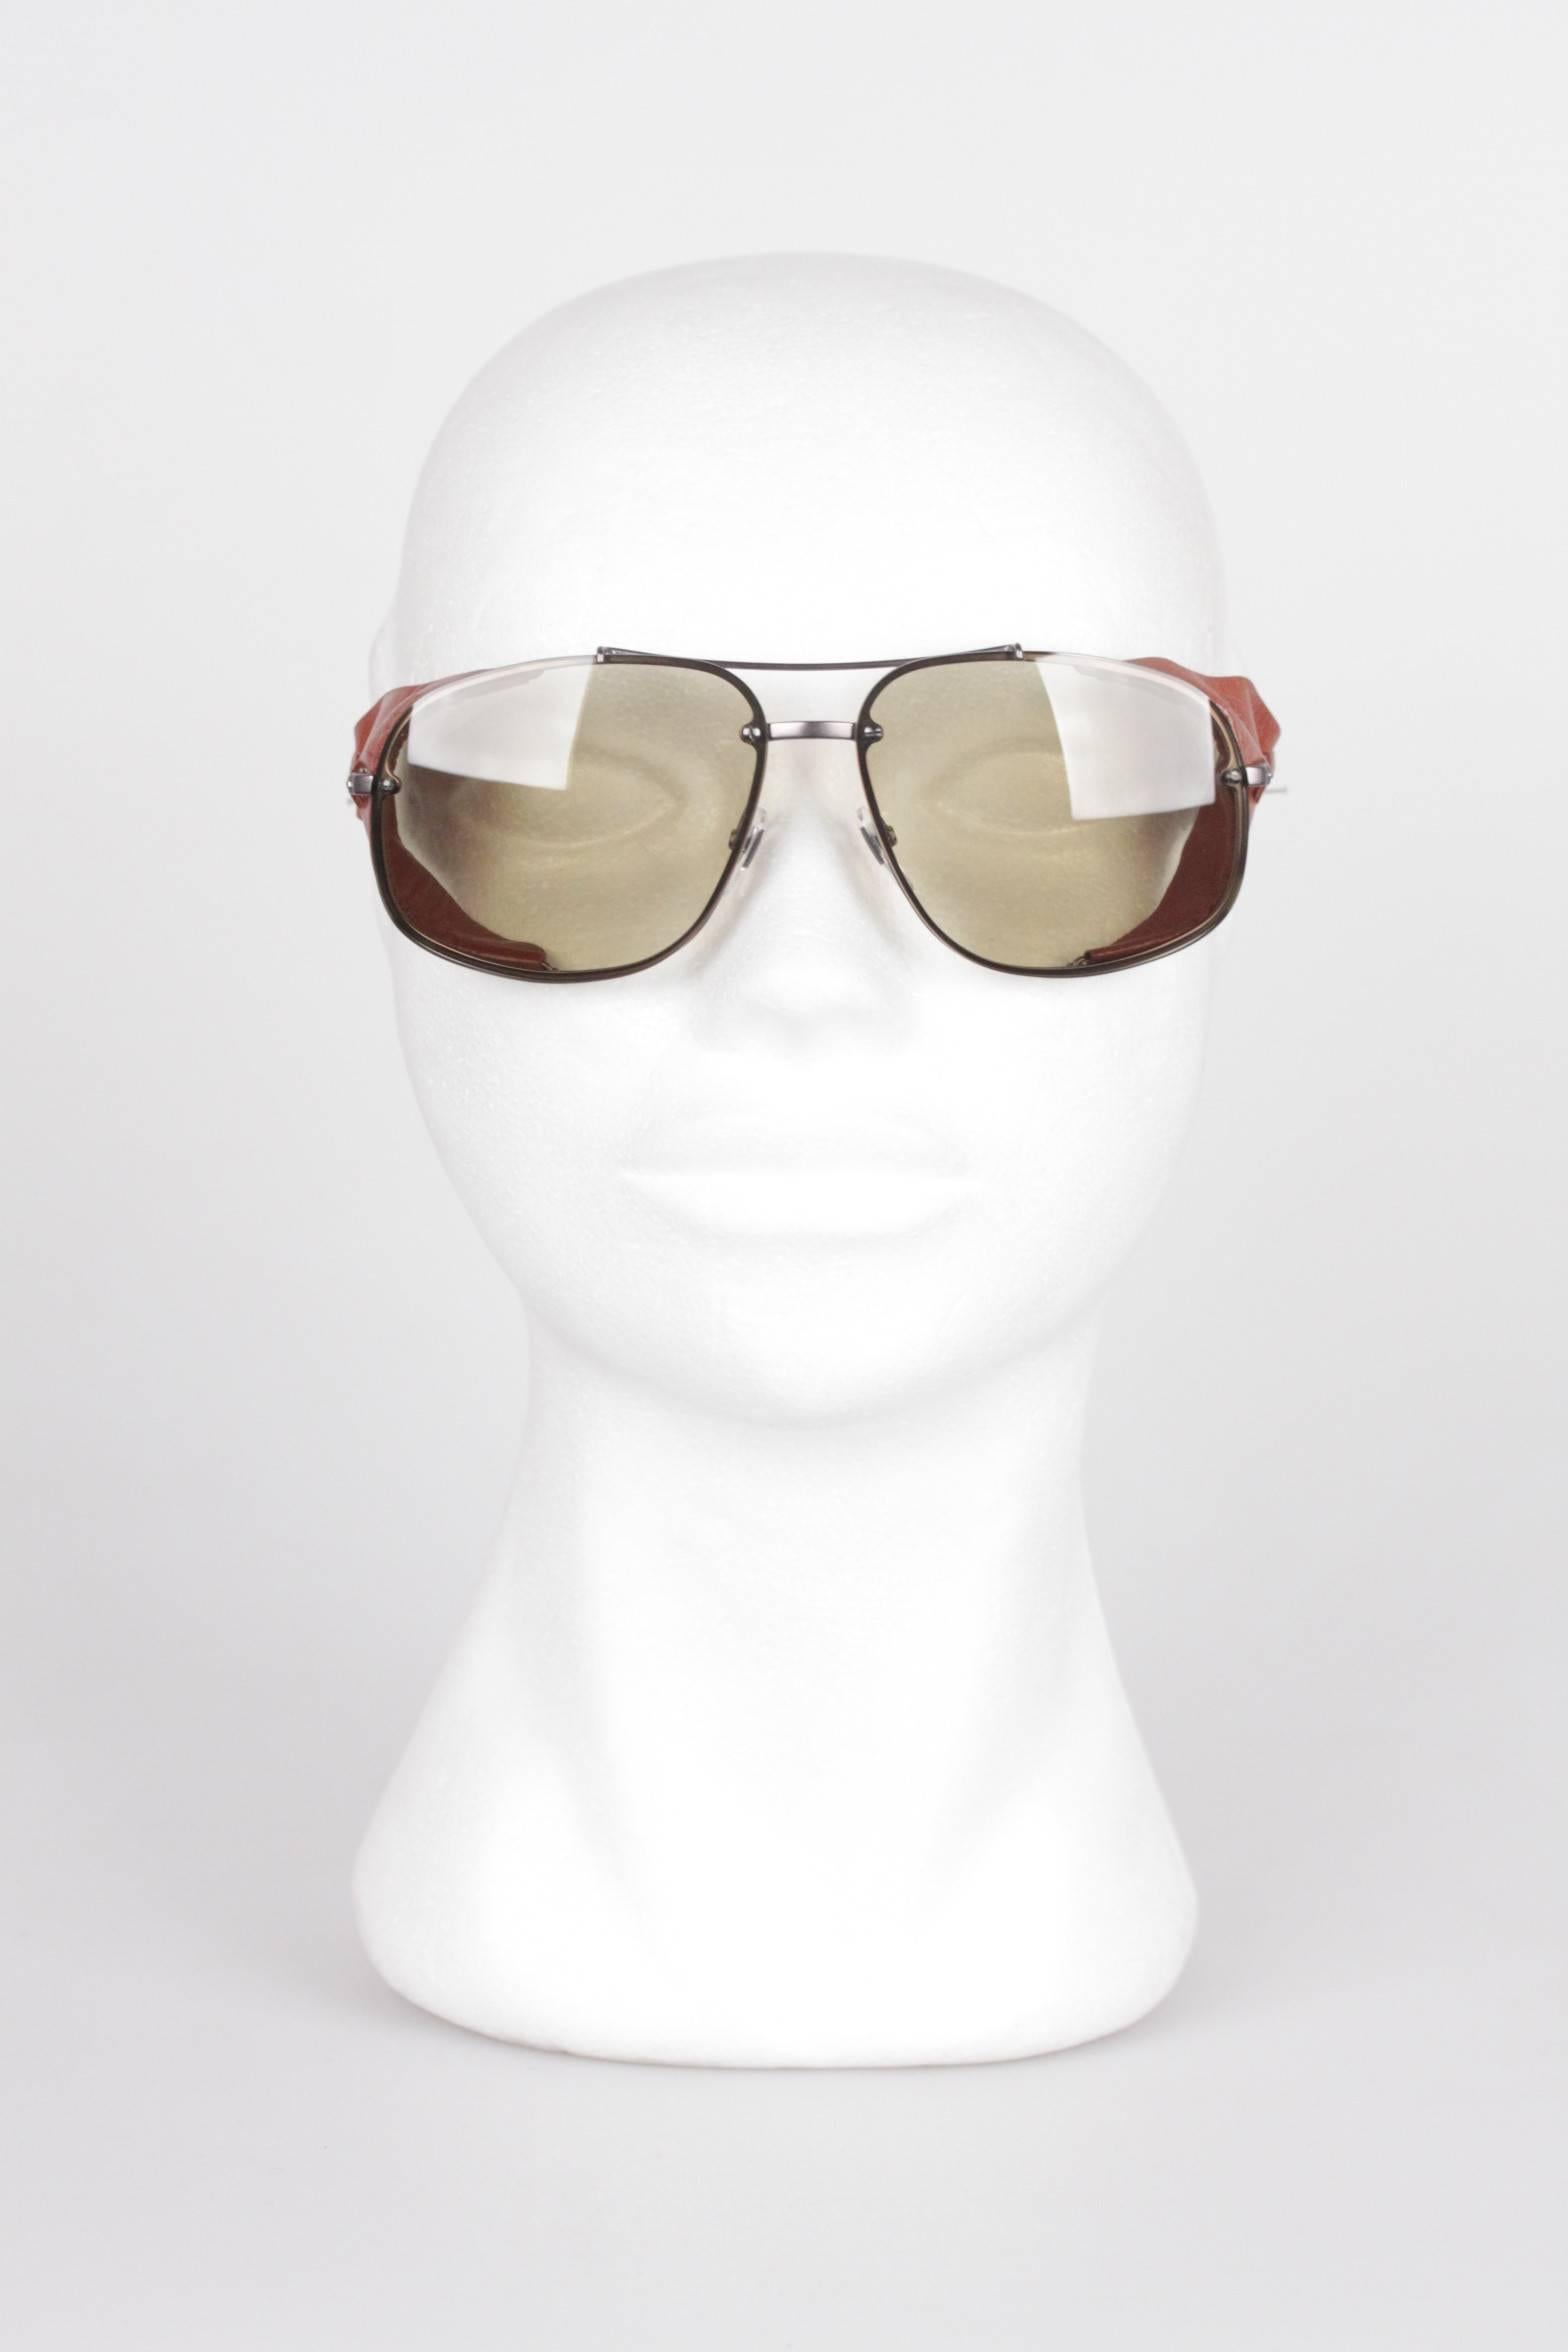 sunglasses with leather side shields